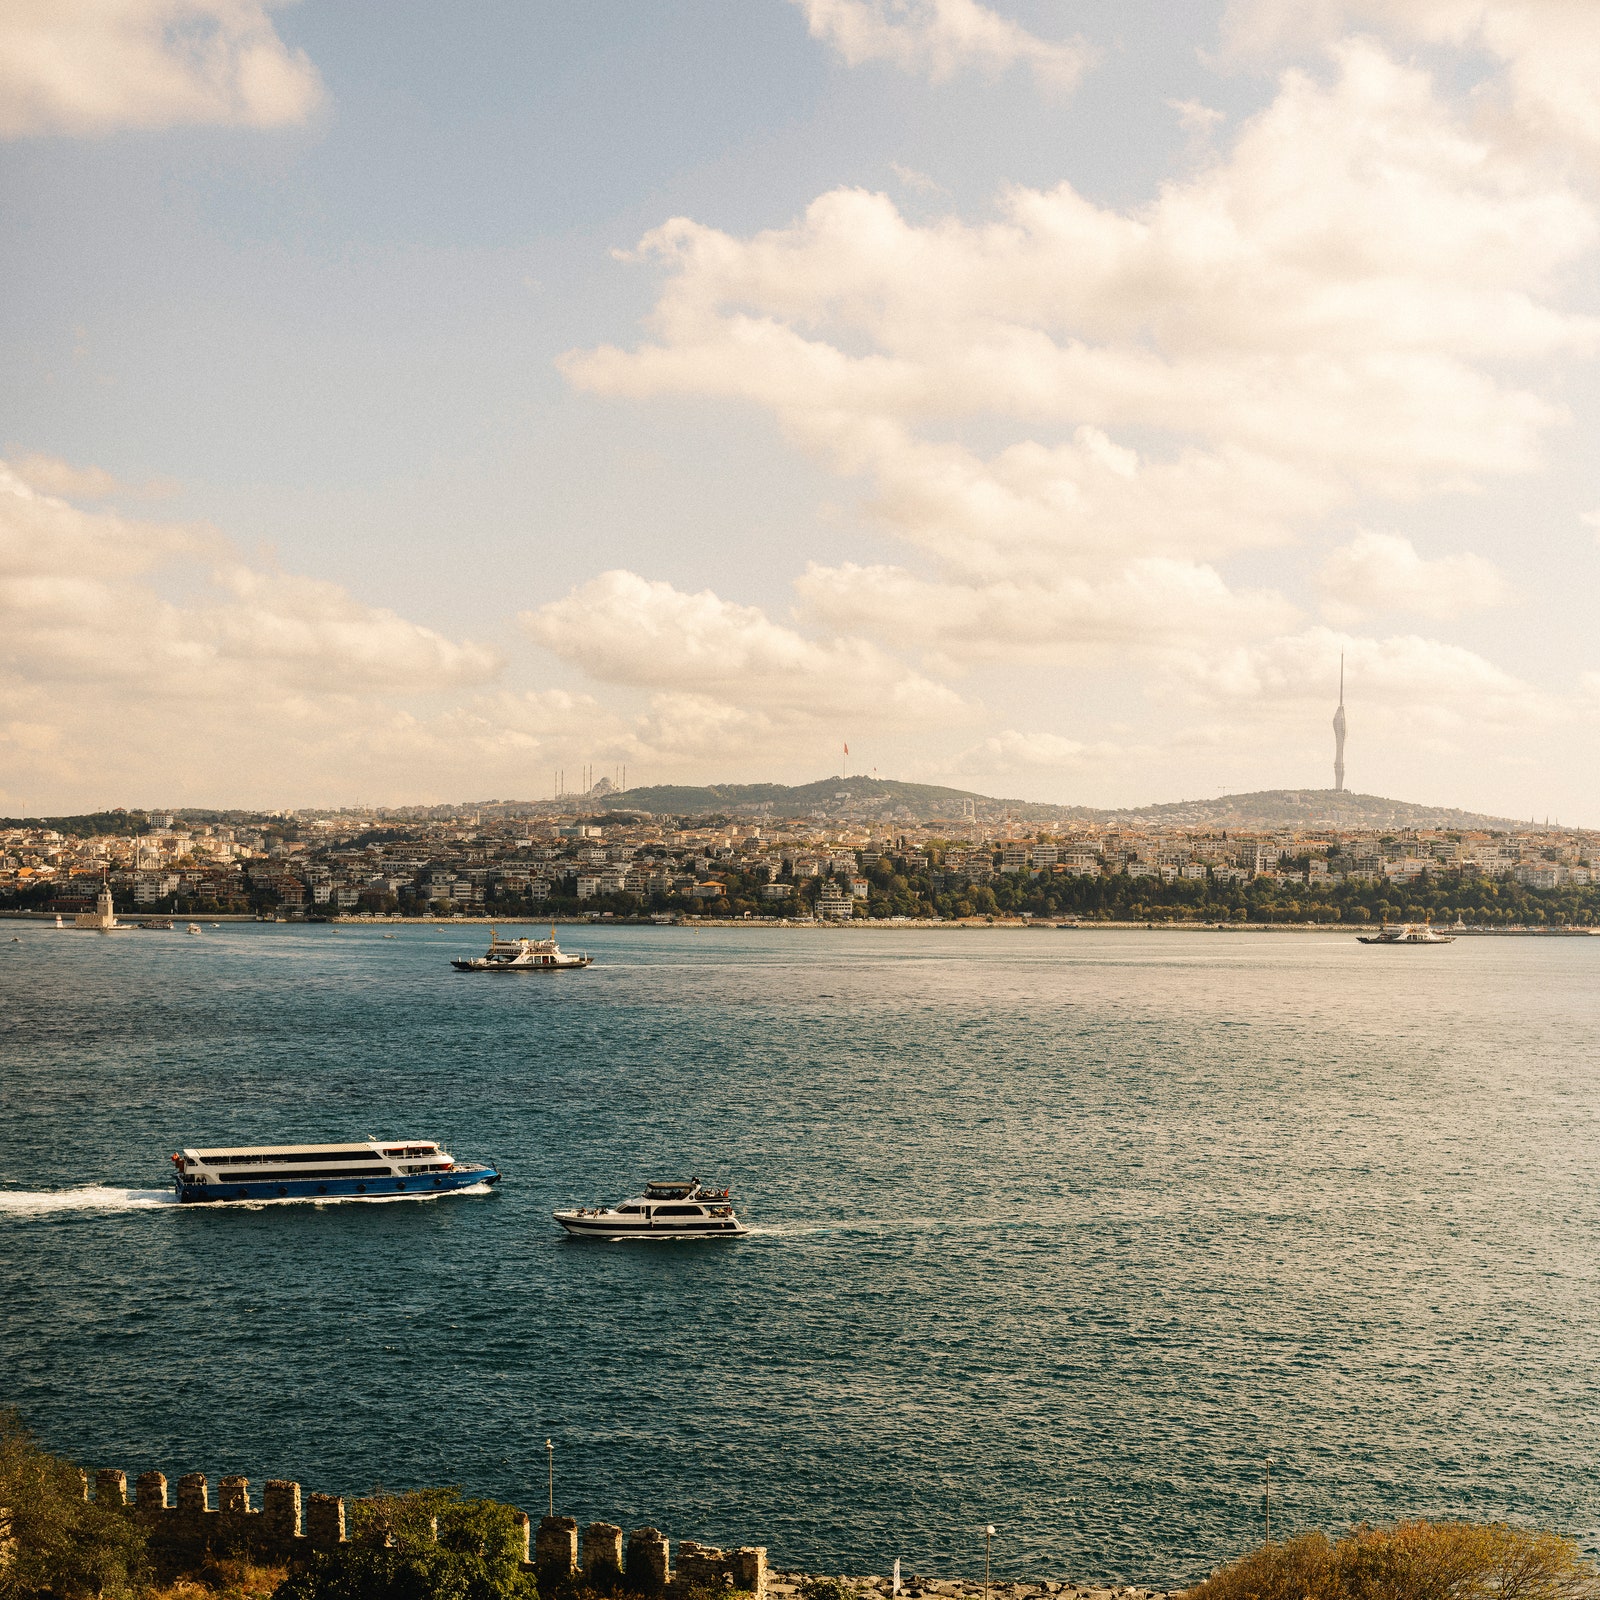 What to see and do in Istanbul according to a stylish local